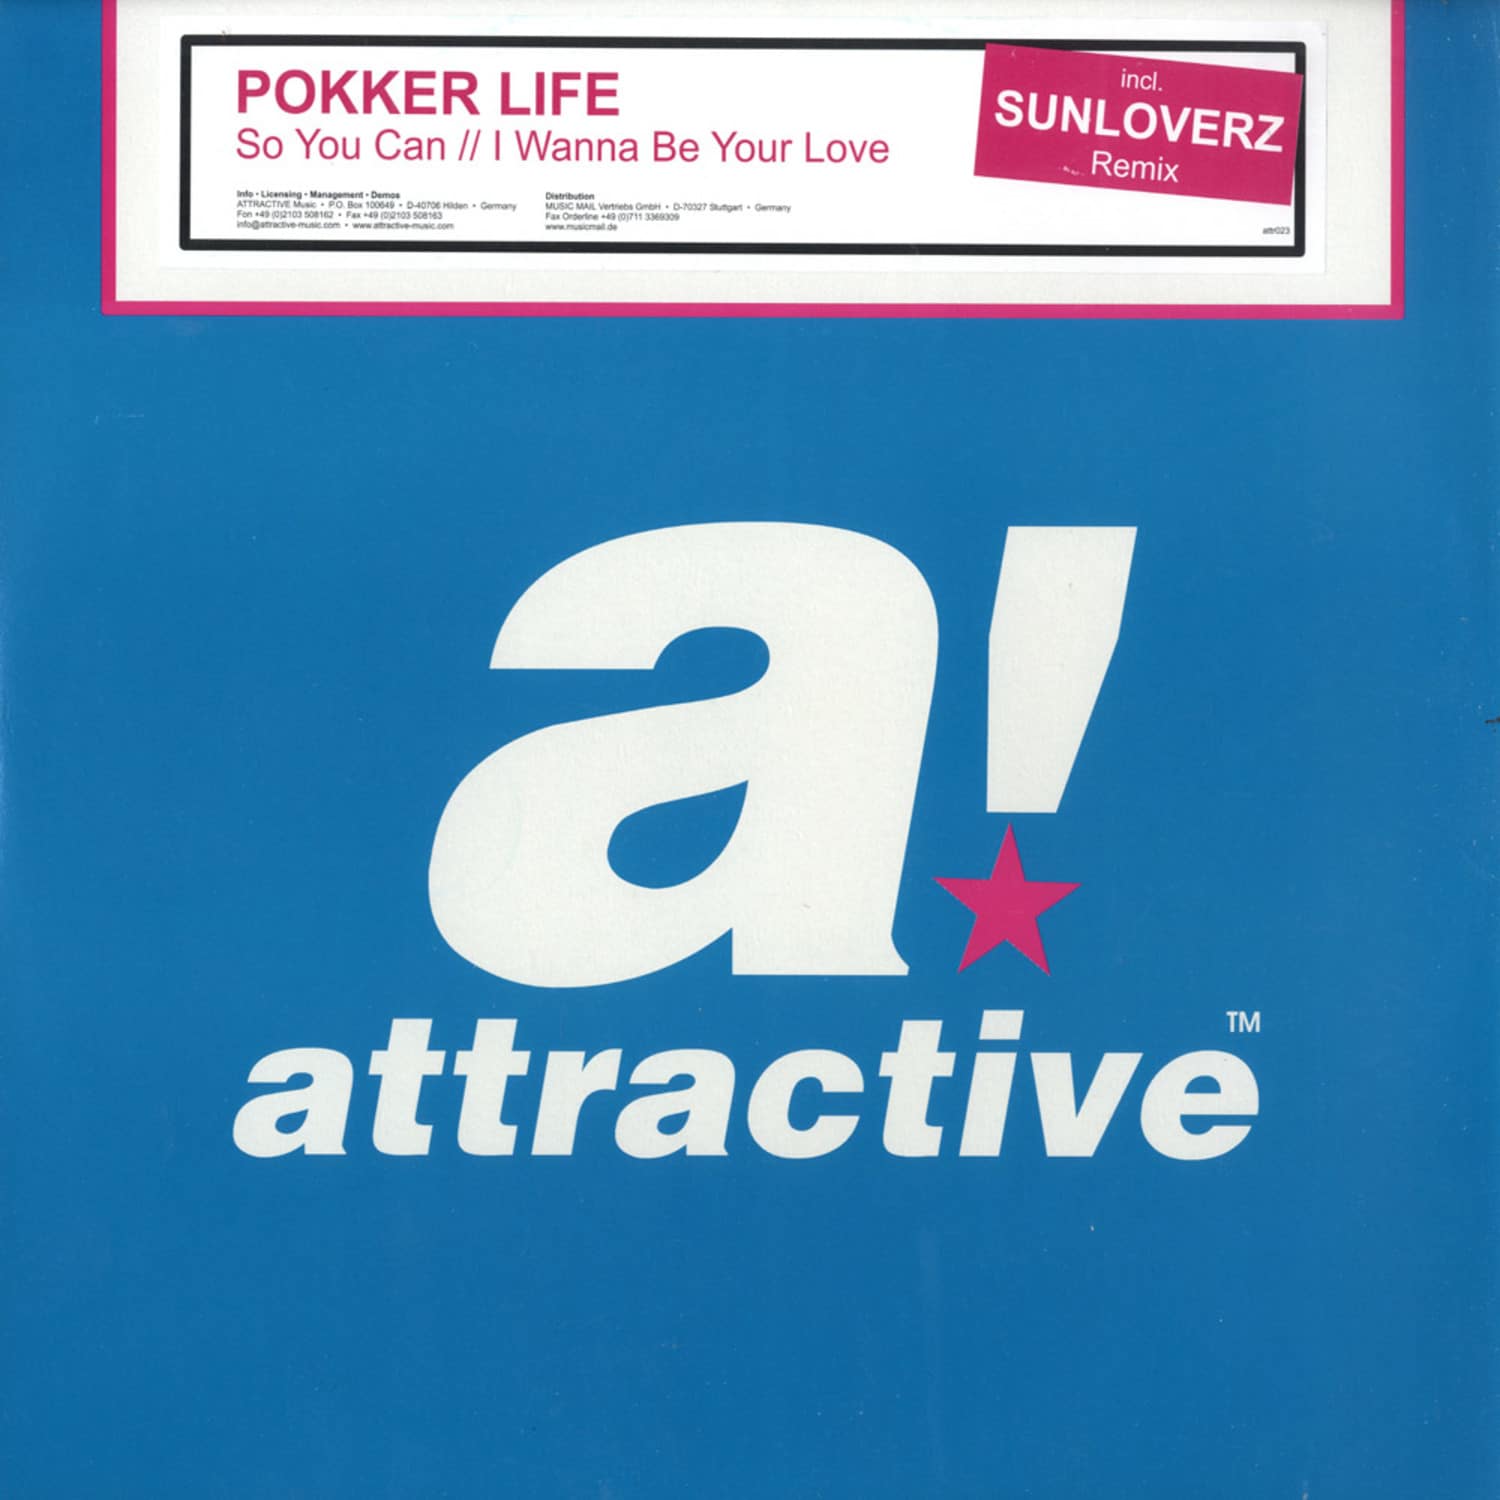 Pokker Life - SO YOU CAN / I WANNA BE YOUR LOVE